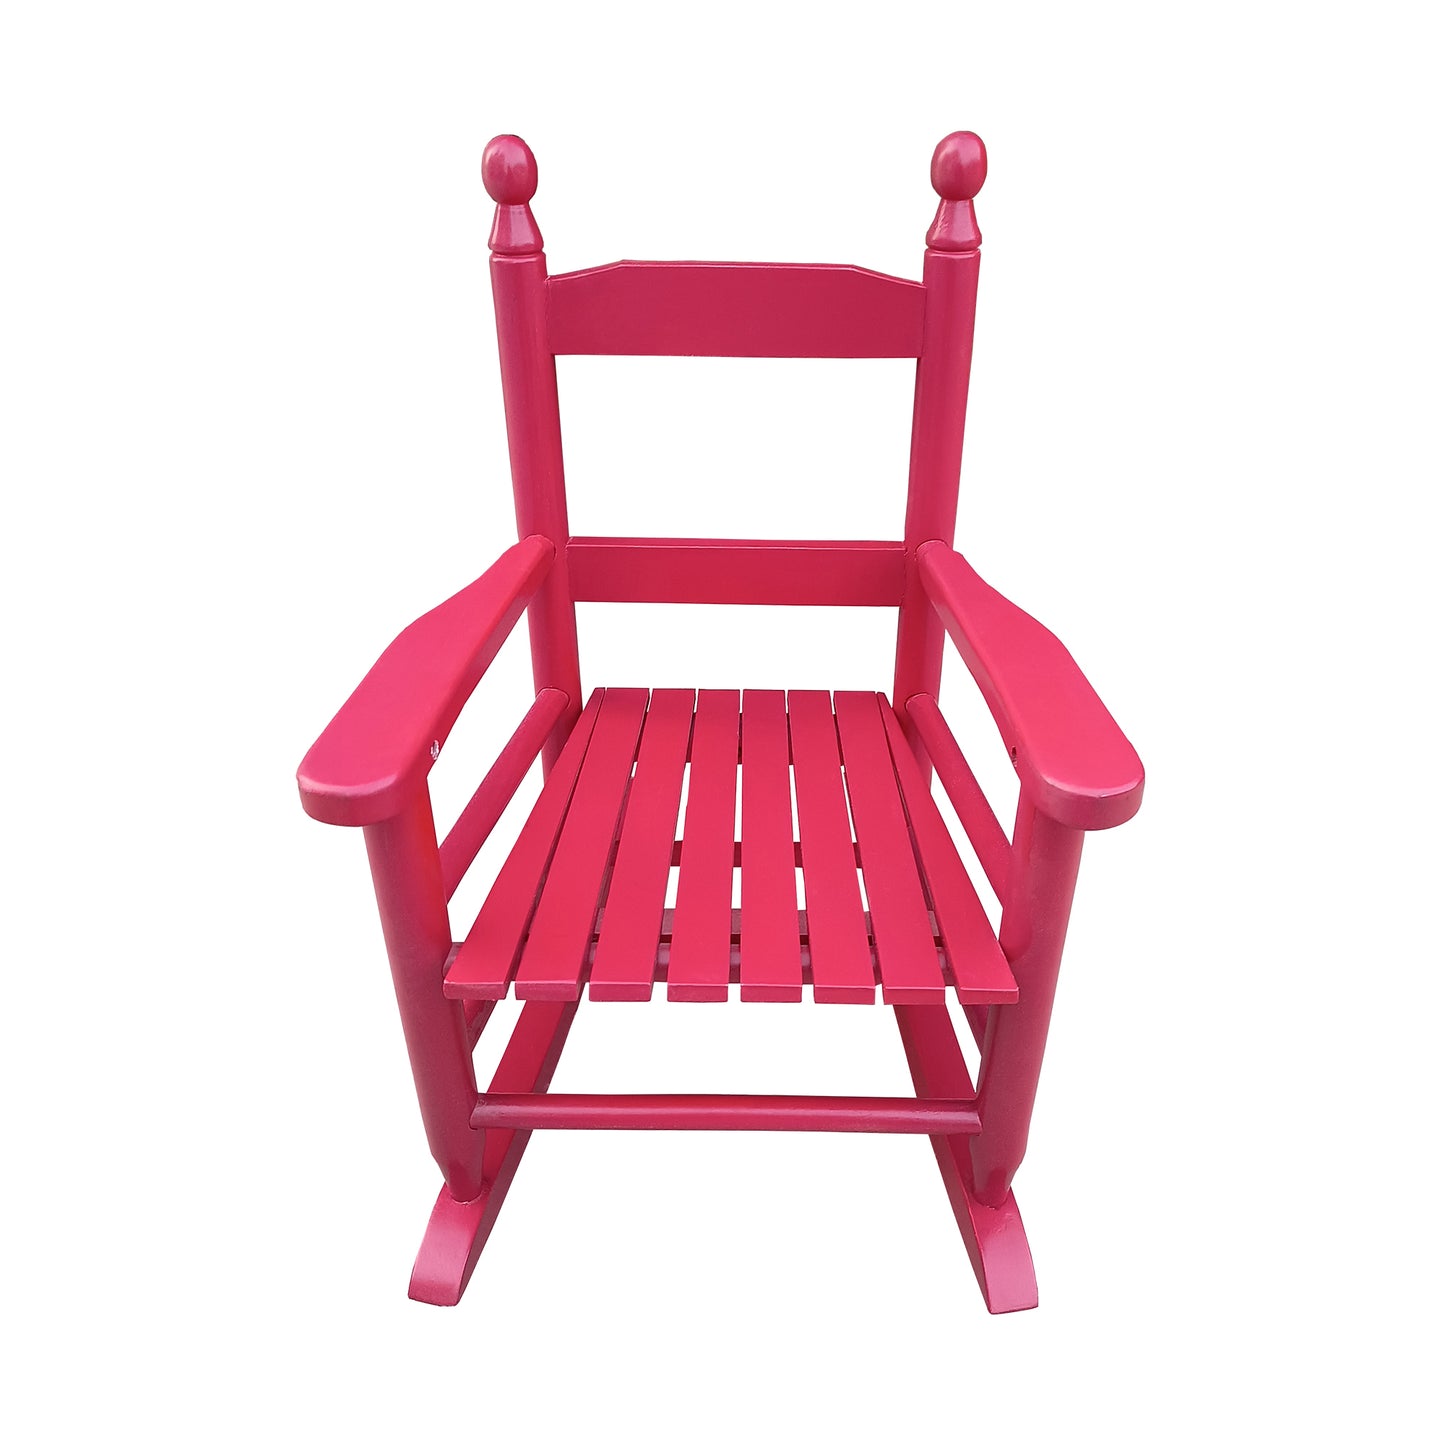 Children's rocking red chair- Indoor or Outdoor -Suitable for kids-Durable Solid Wood